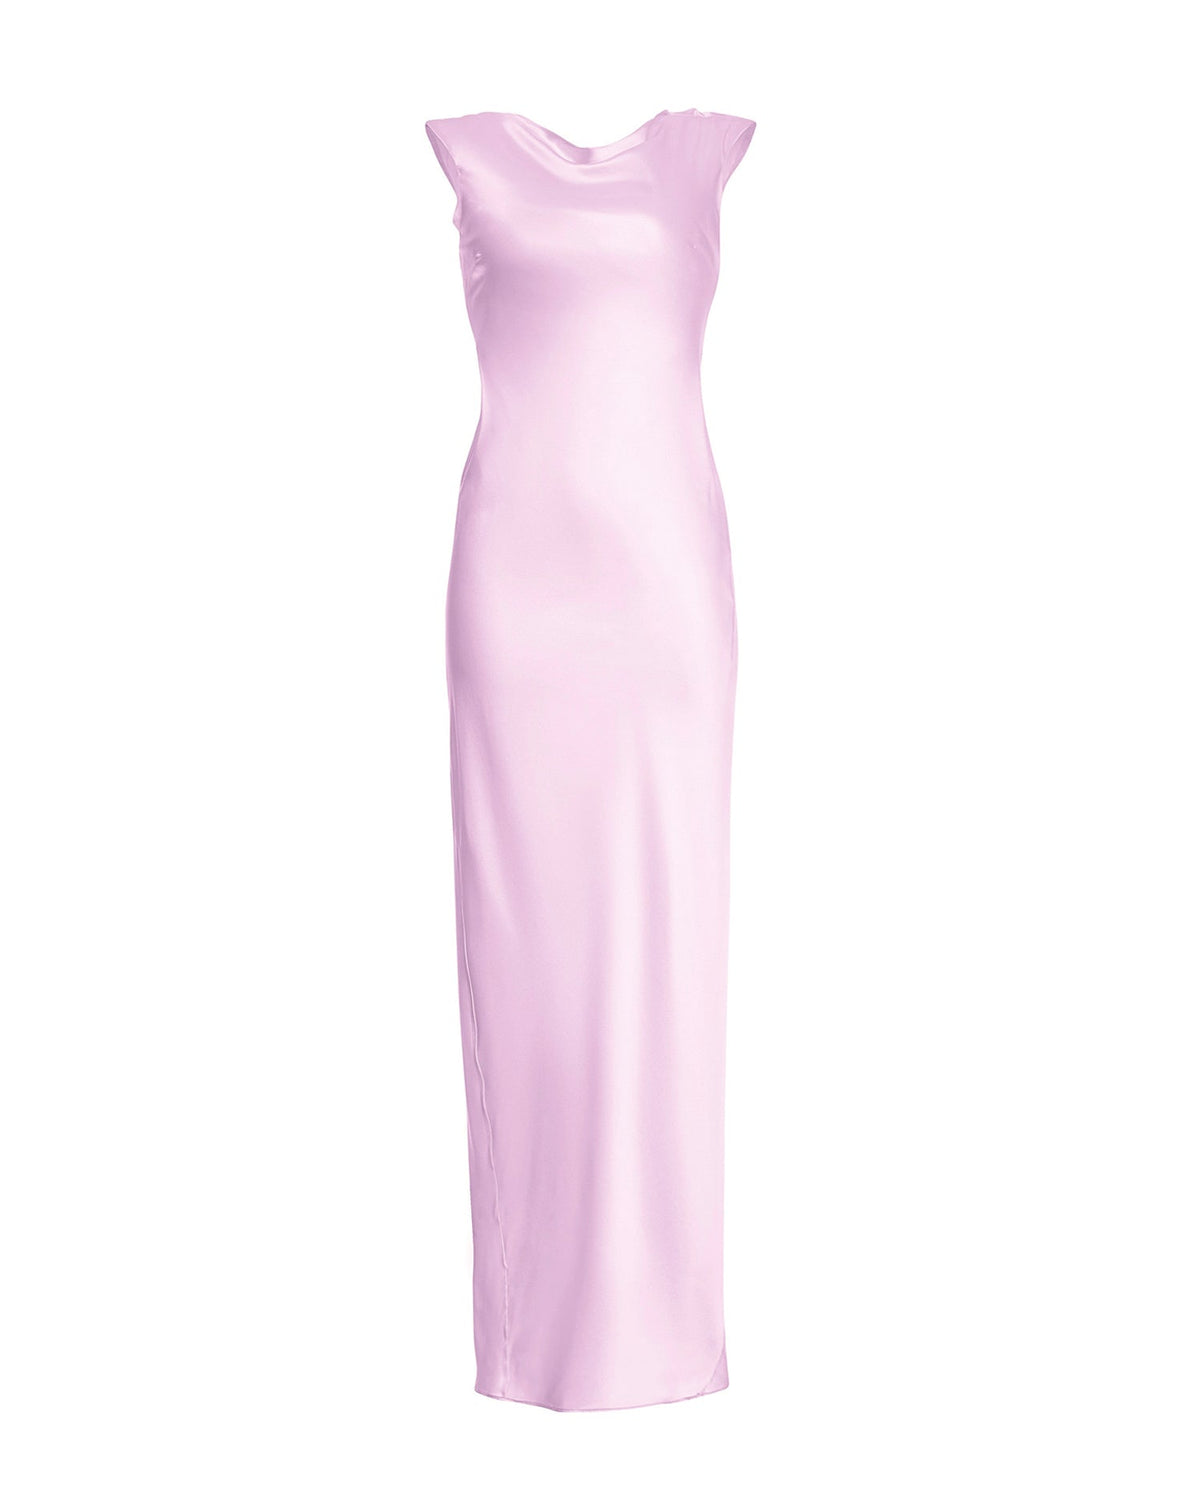 Remy Gown in Lilac